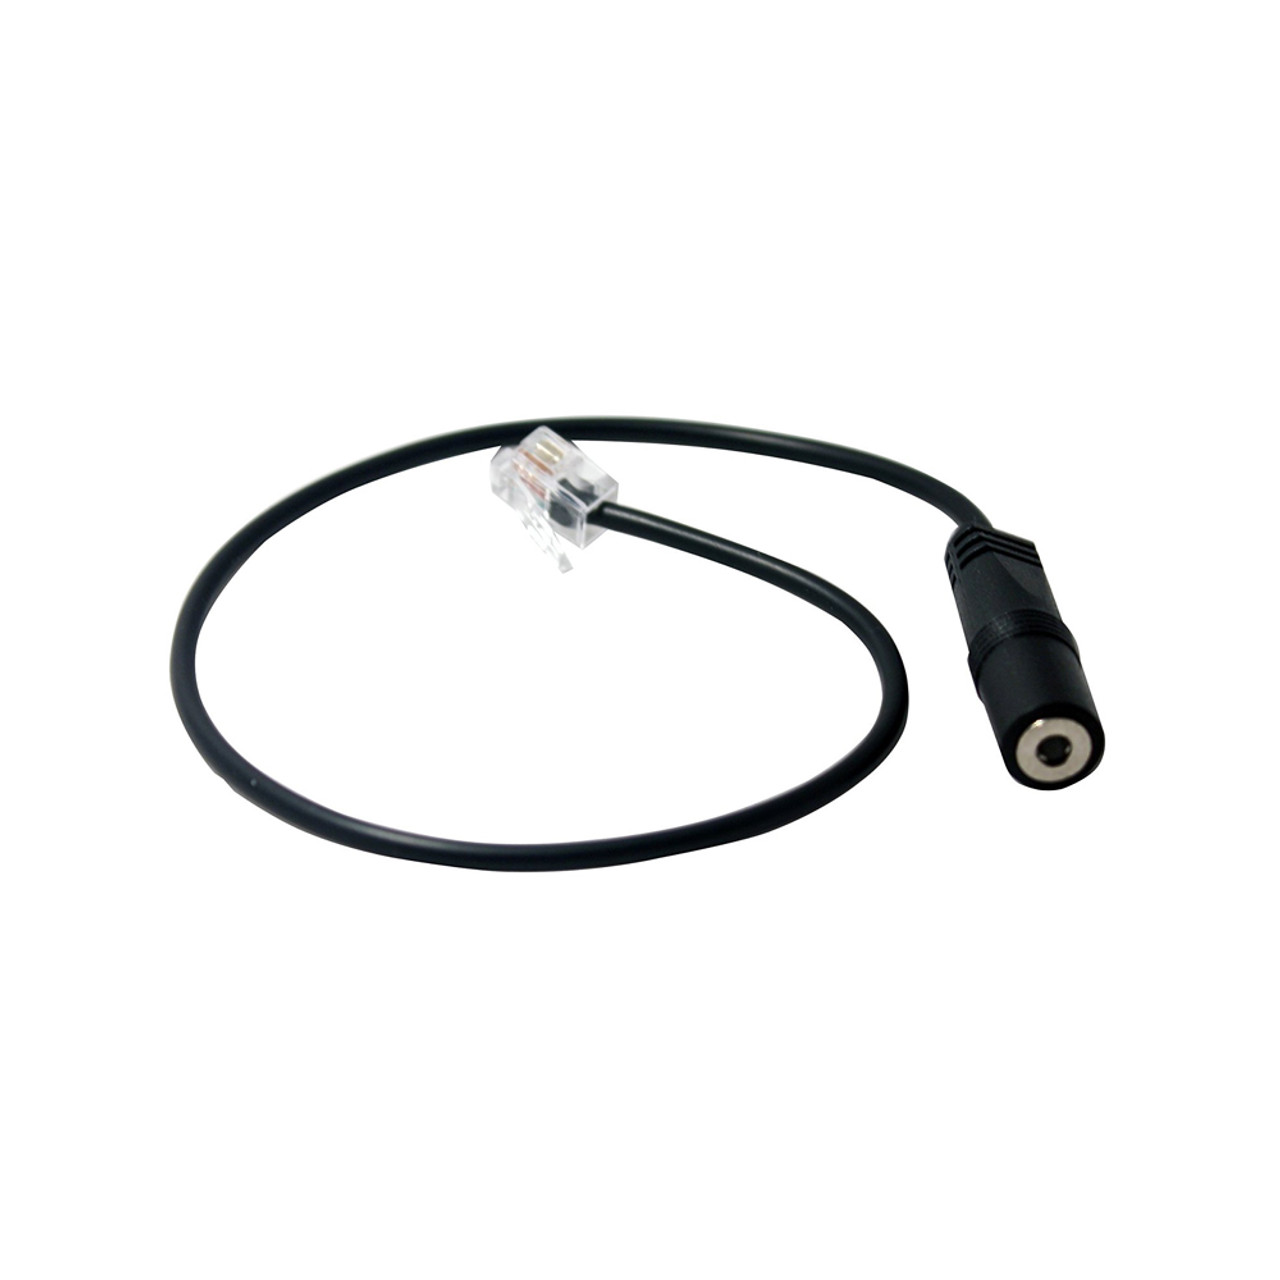 RJ11 adapter for Headset-Micro Jack 3.5 mm hotline telephone handset cable